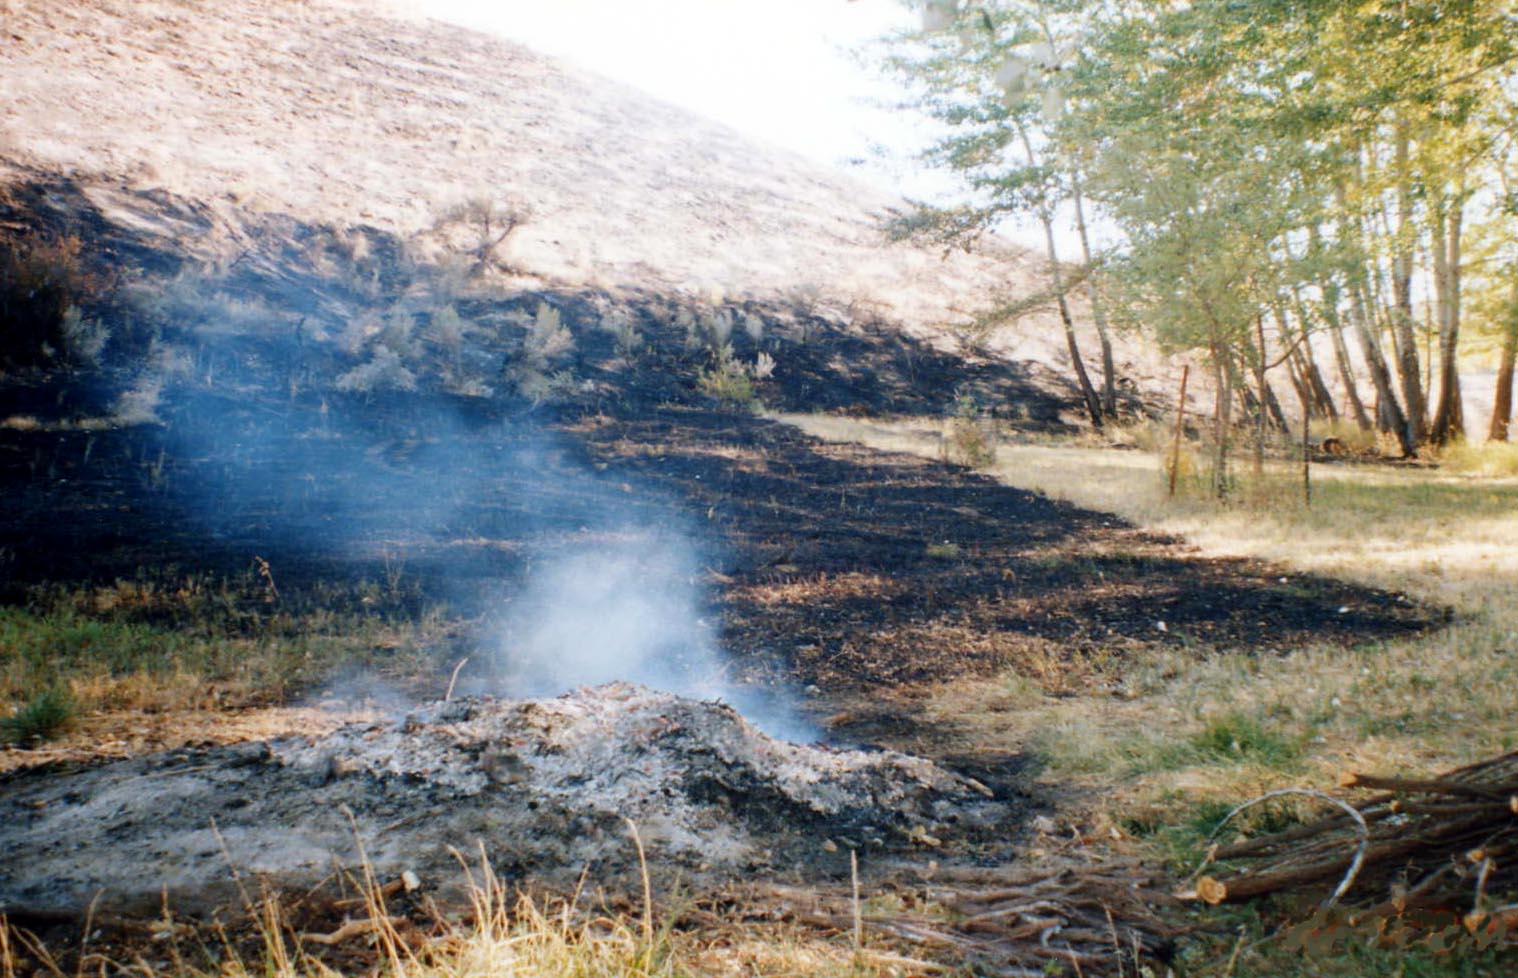 Debris burning can cause wildfires.